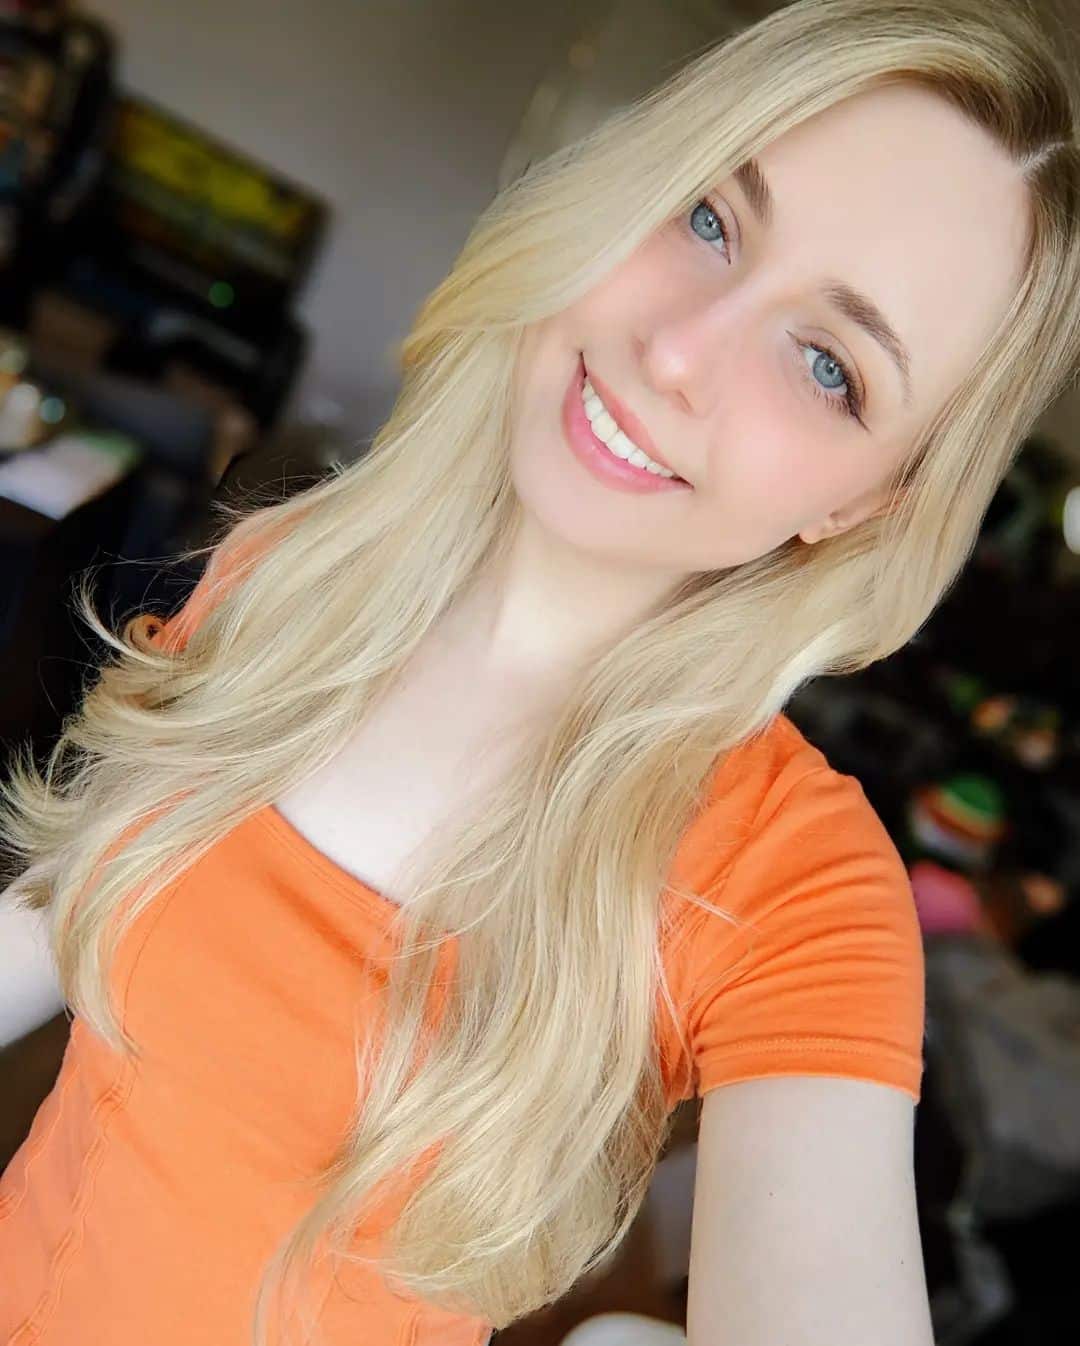 LIVE with the 10 HOURS FOR 10K!!
Twitch.tv/LittleLemonbun
.
.
.
.
.
.
.
.
.
Tags 11